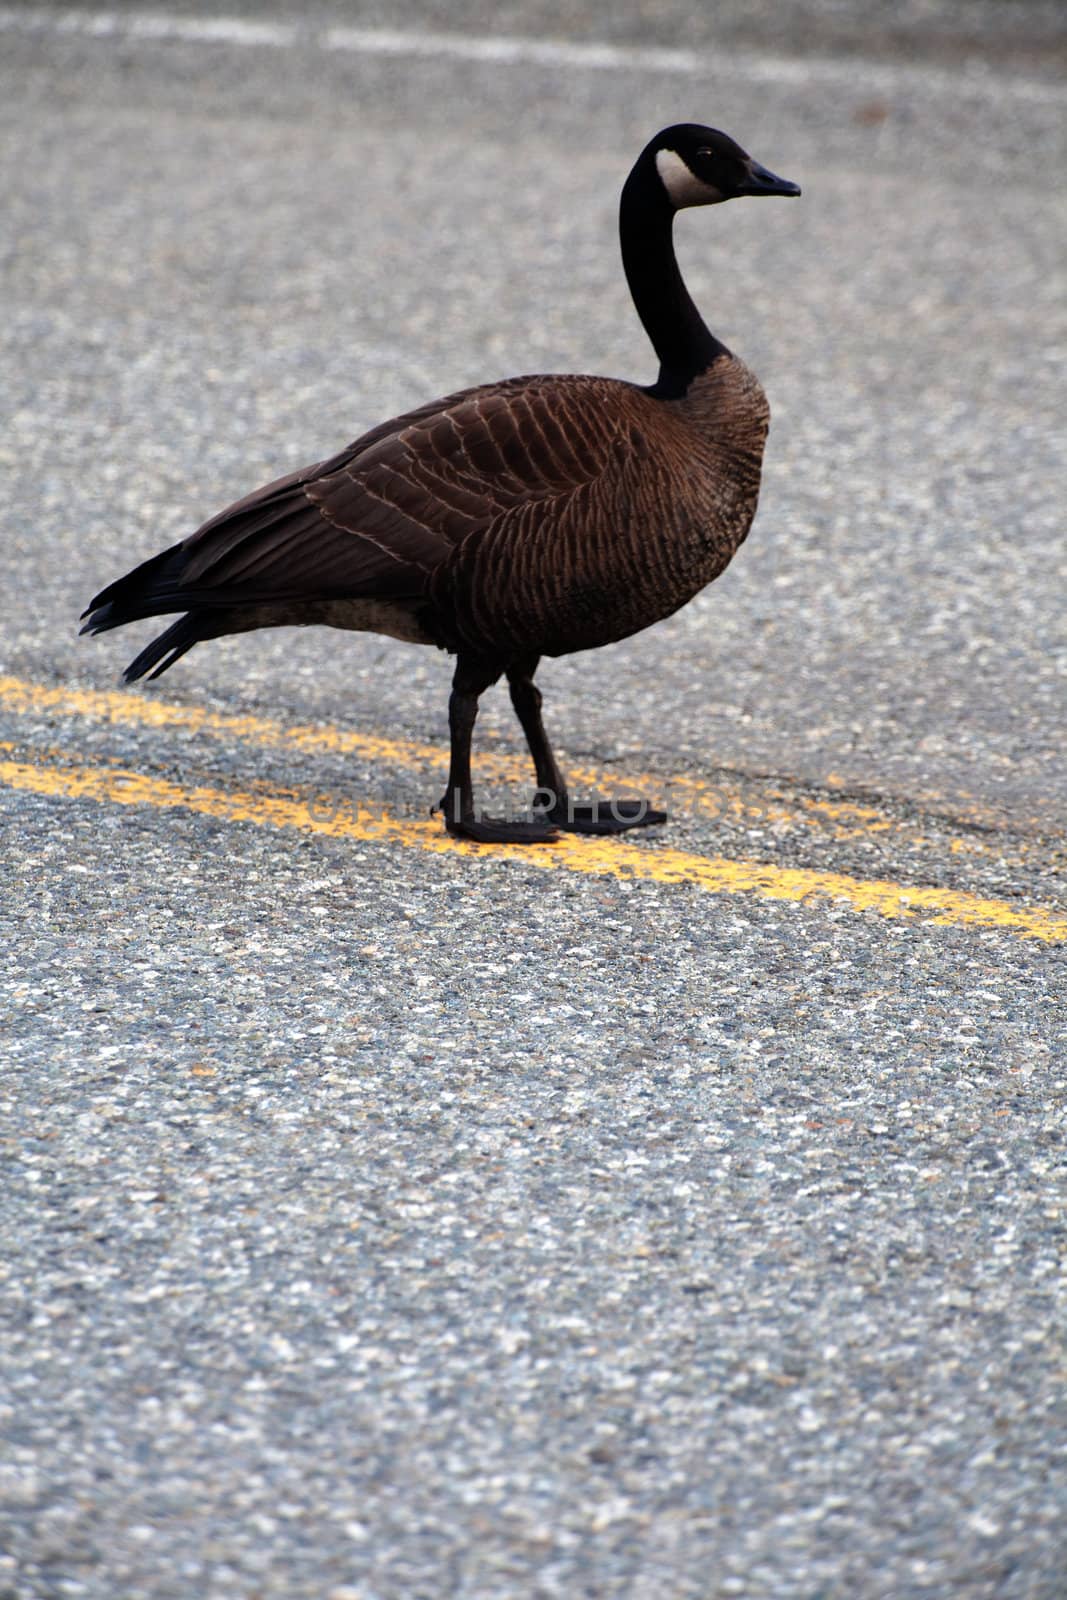 A Canada goose walks in the middle of the road